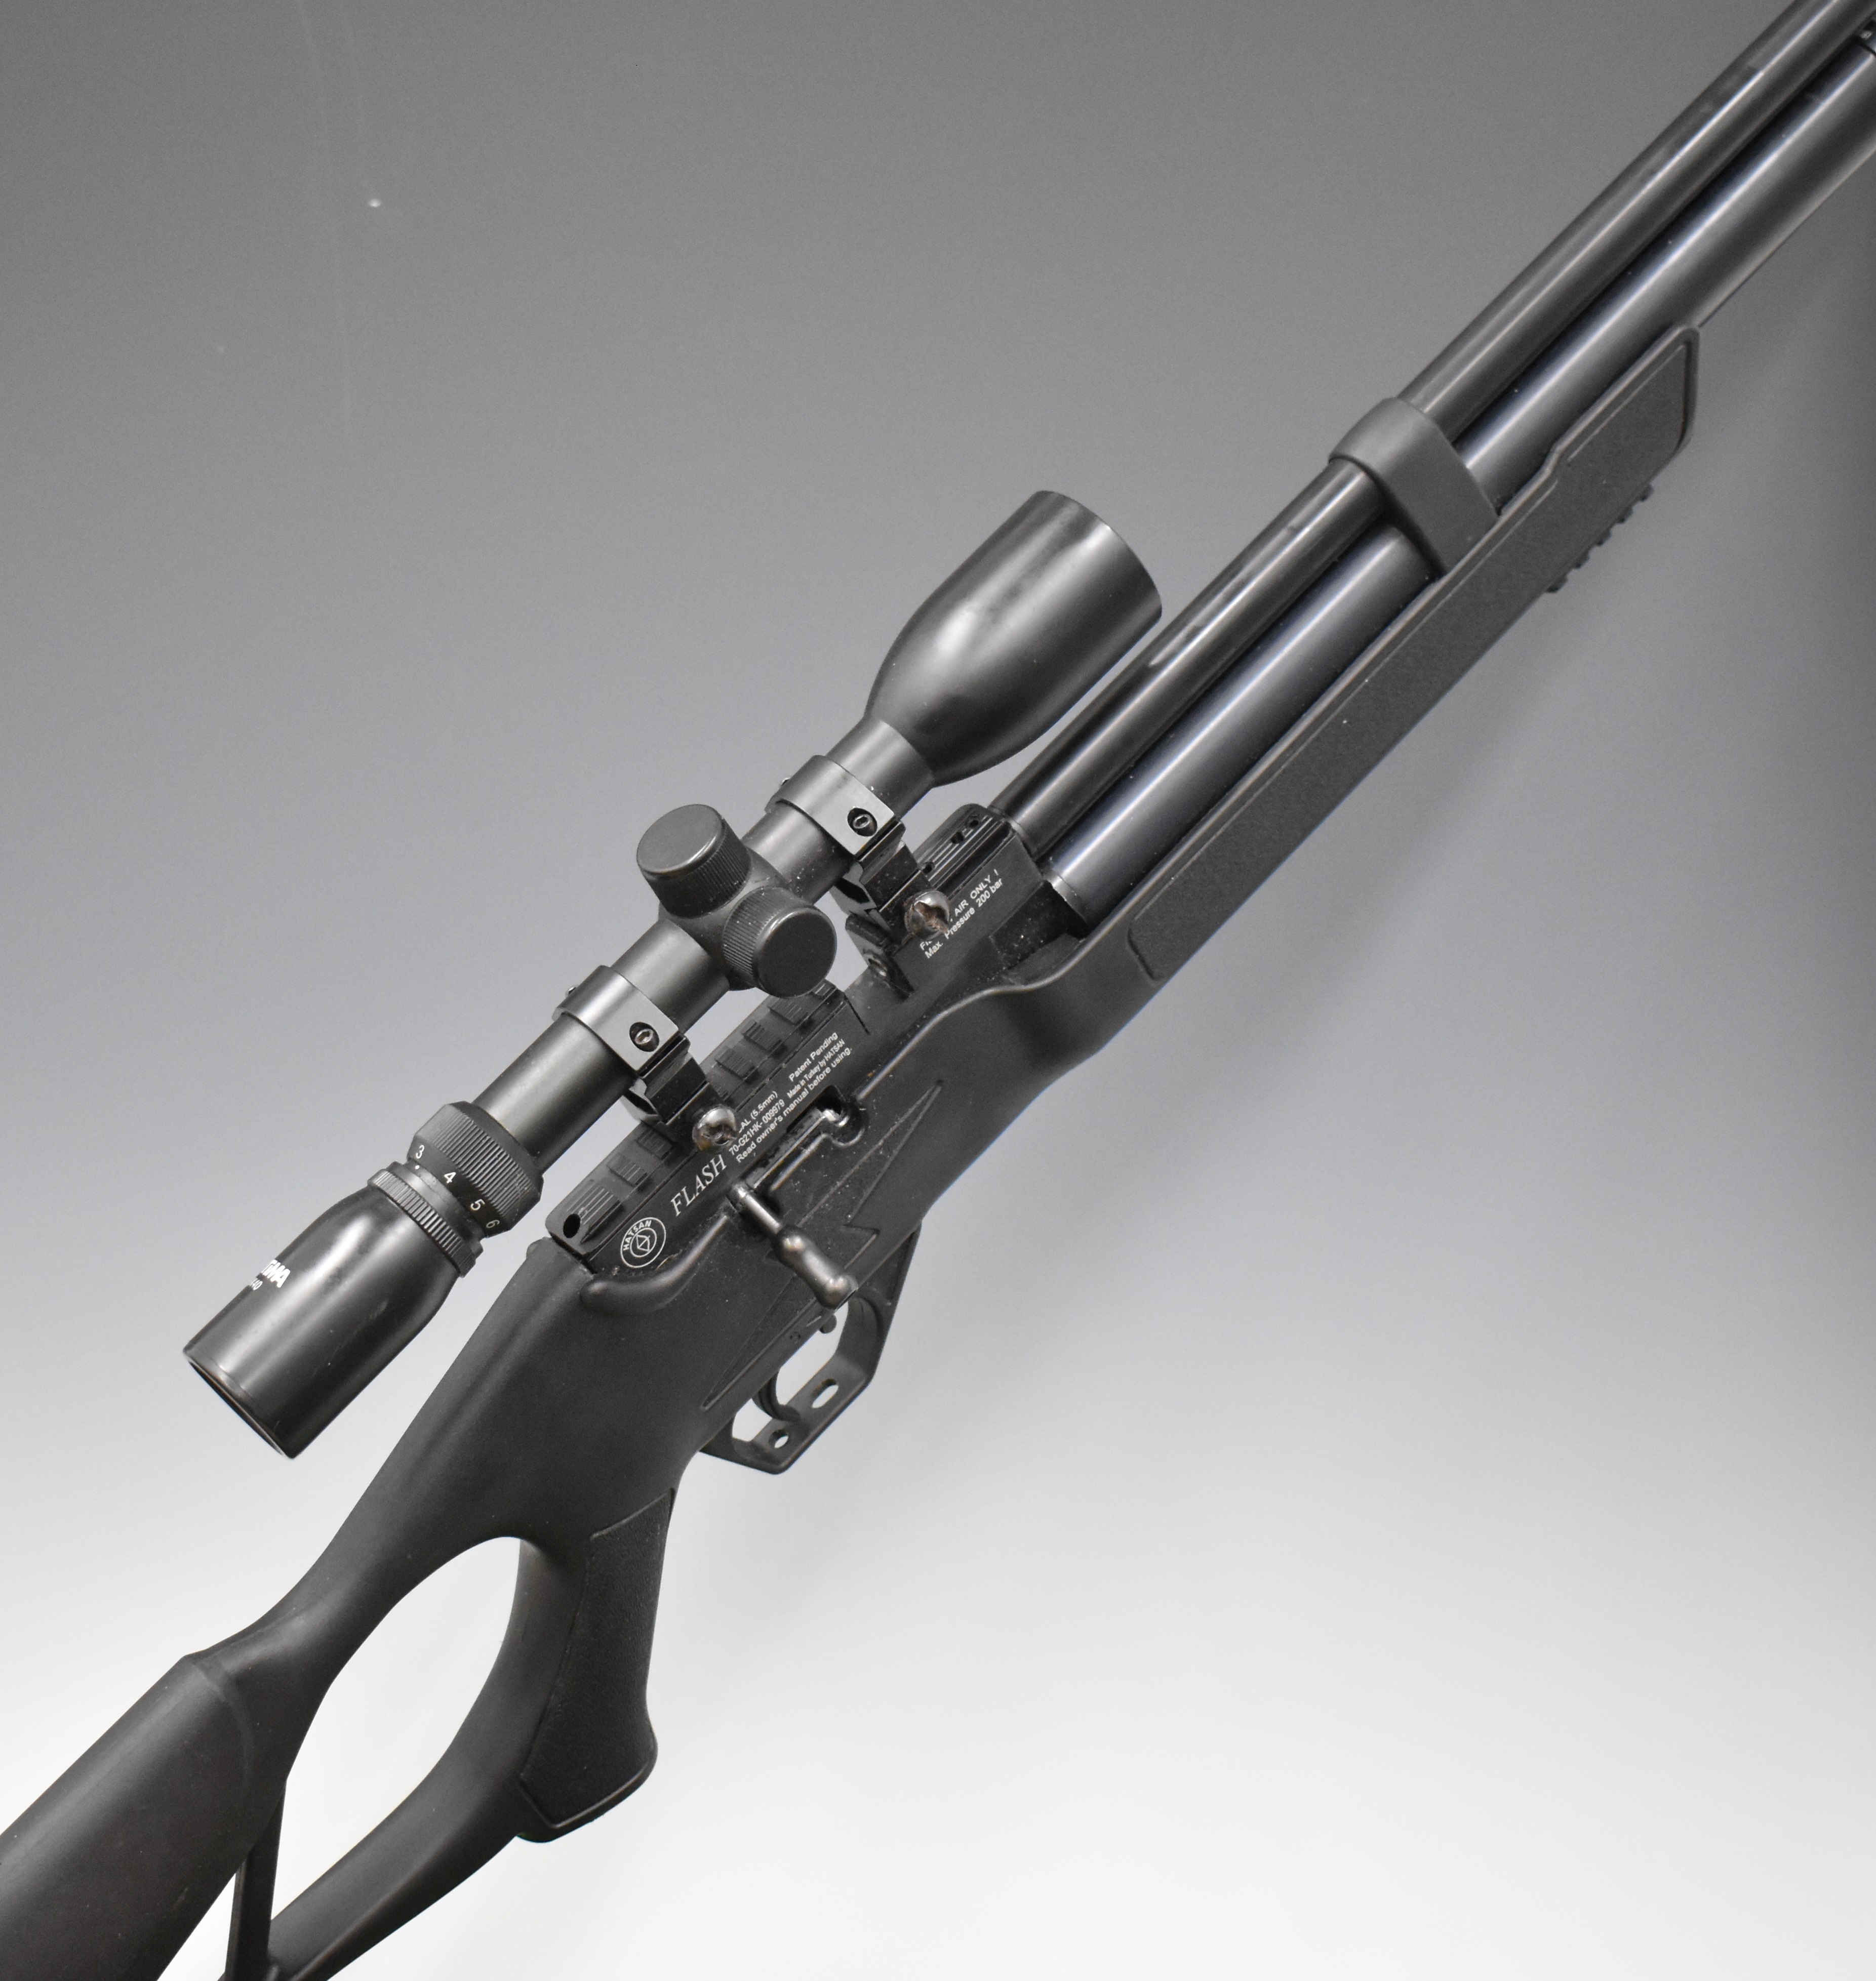 Hatsan Flash .22 PCP air rifle with textured semi-pistol grip and forend, composite skeleton